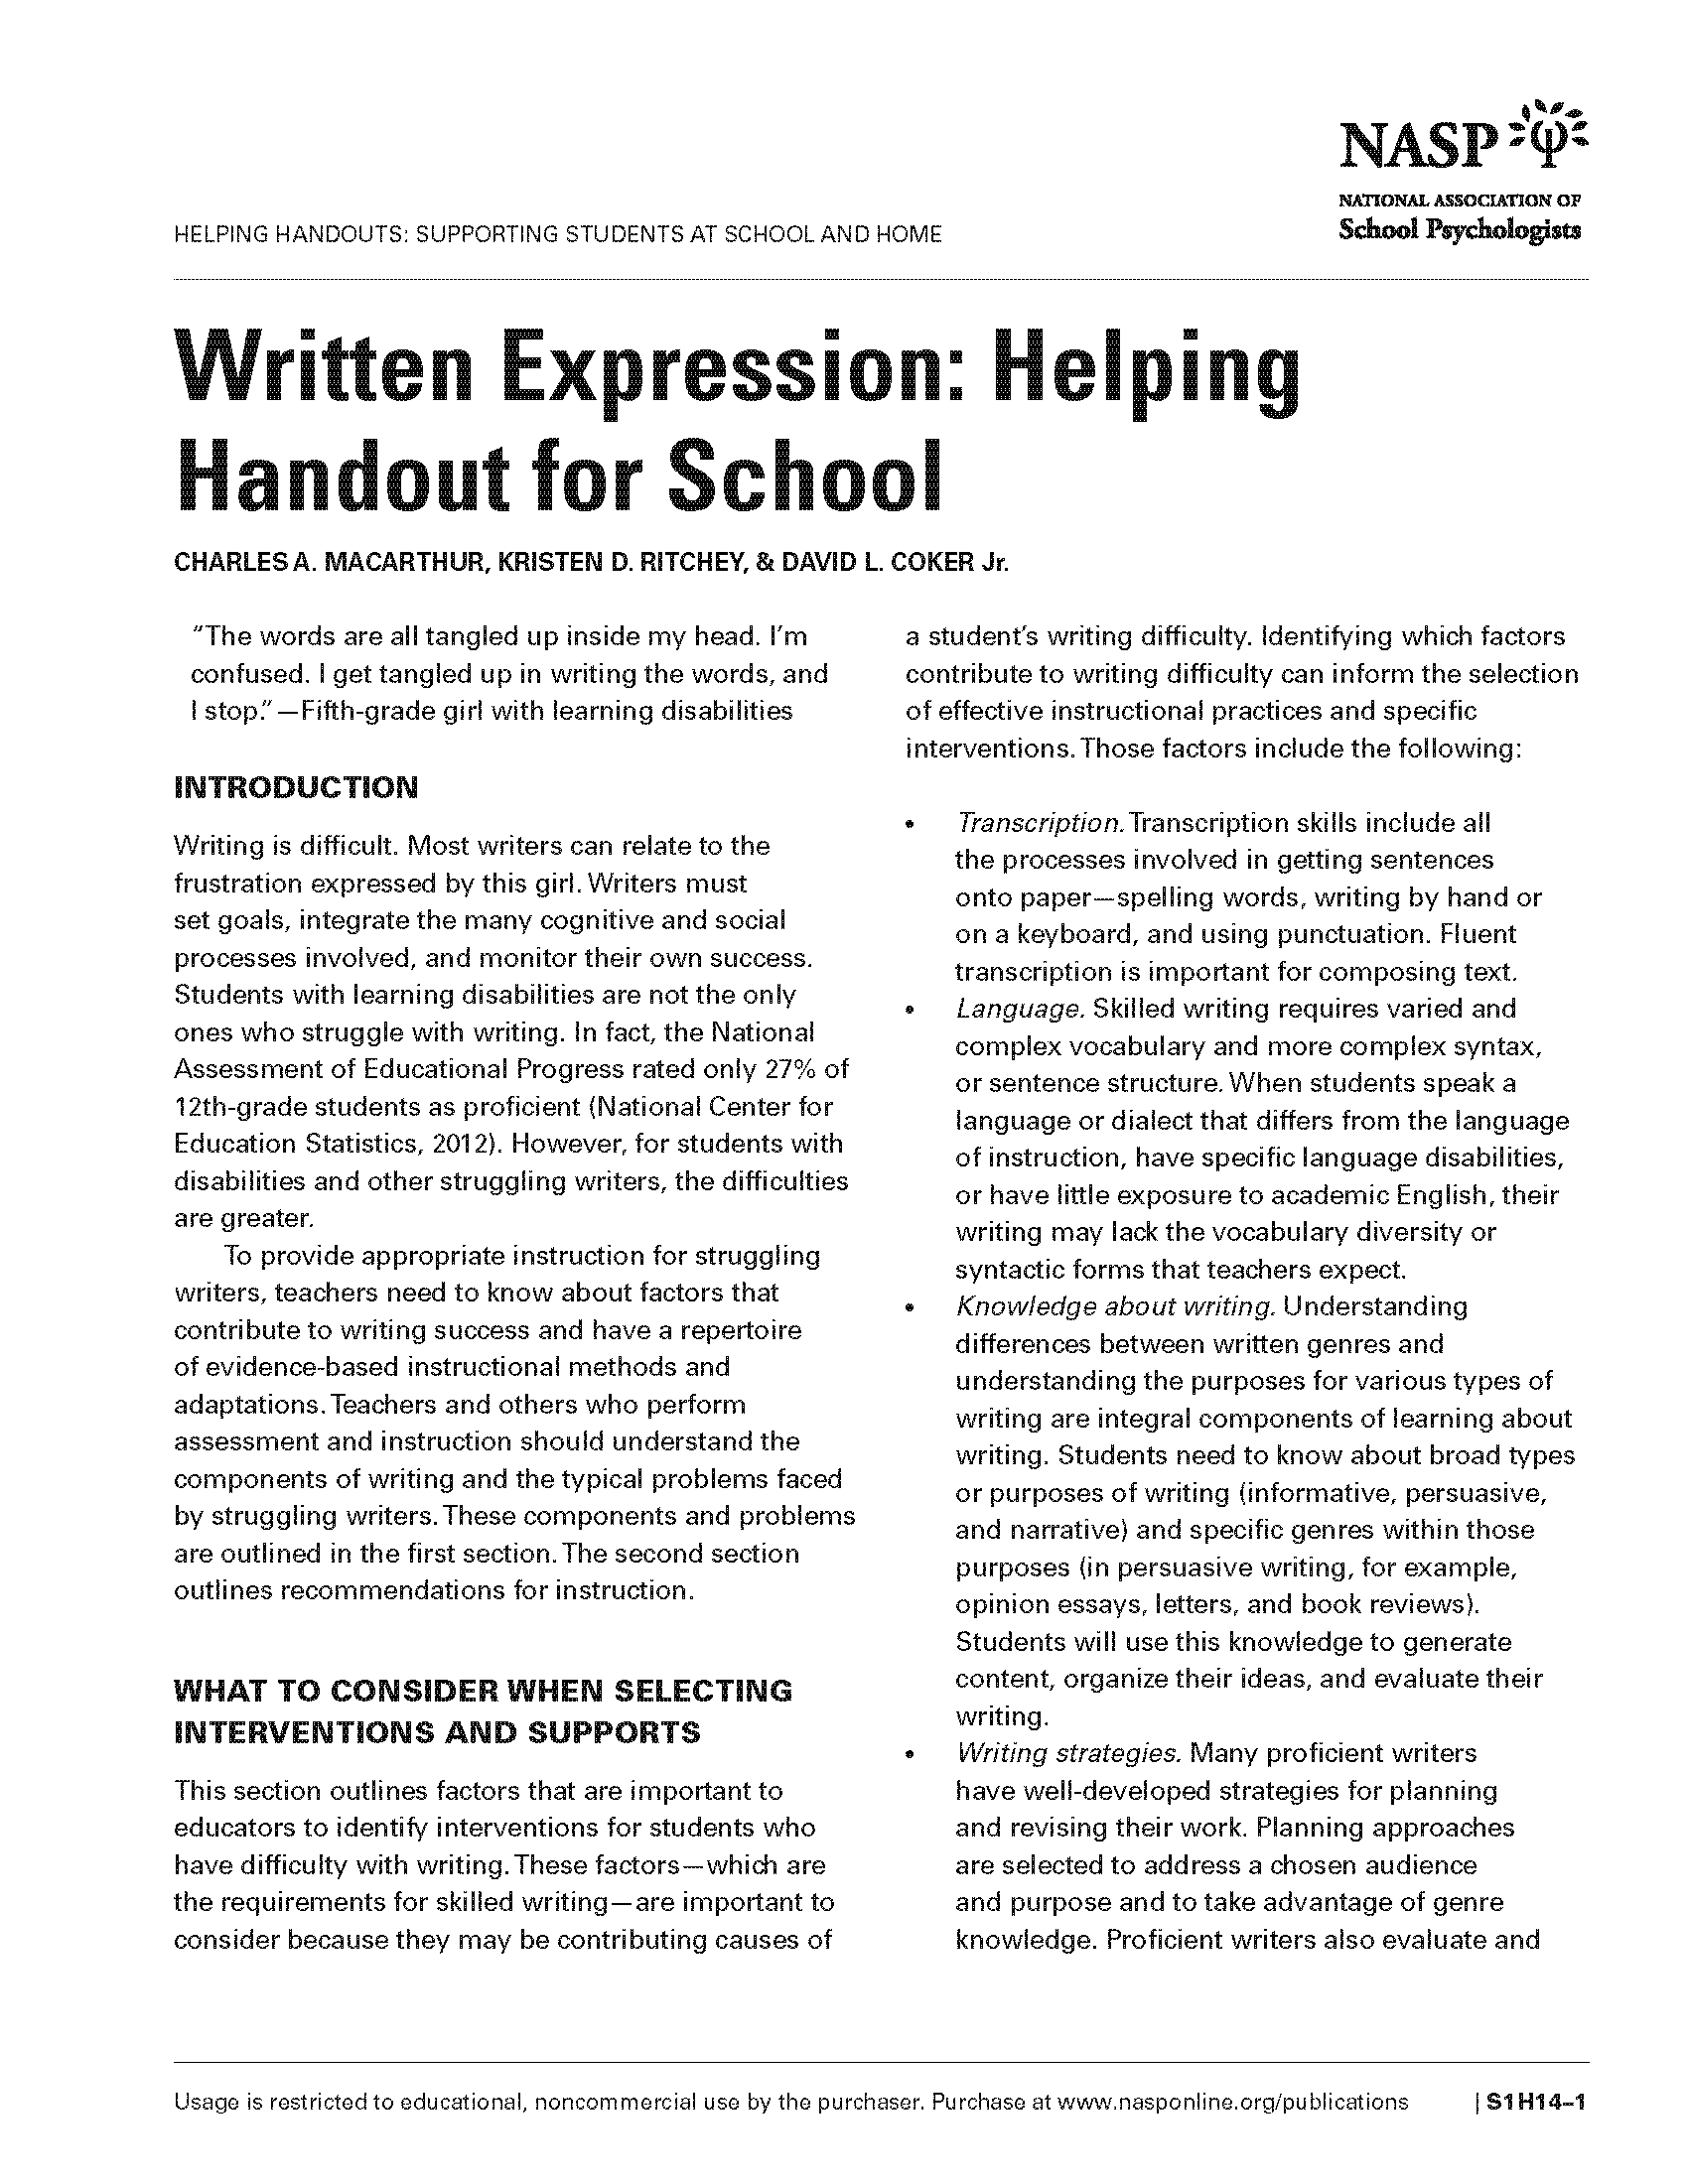 Written Expression: Helping Handout for School